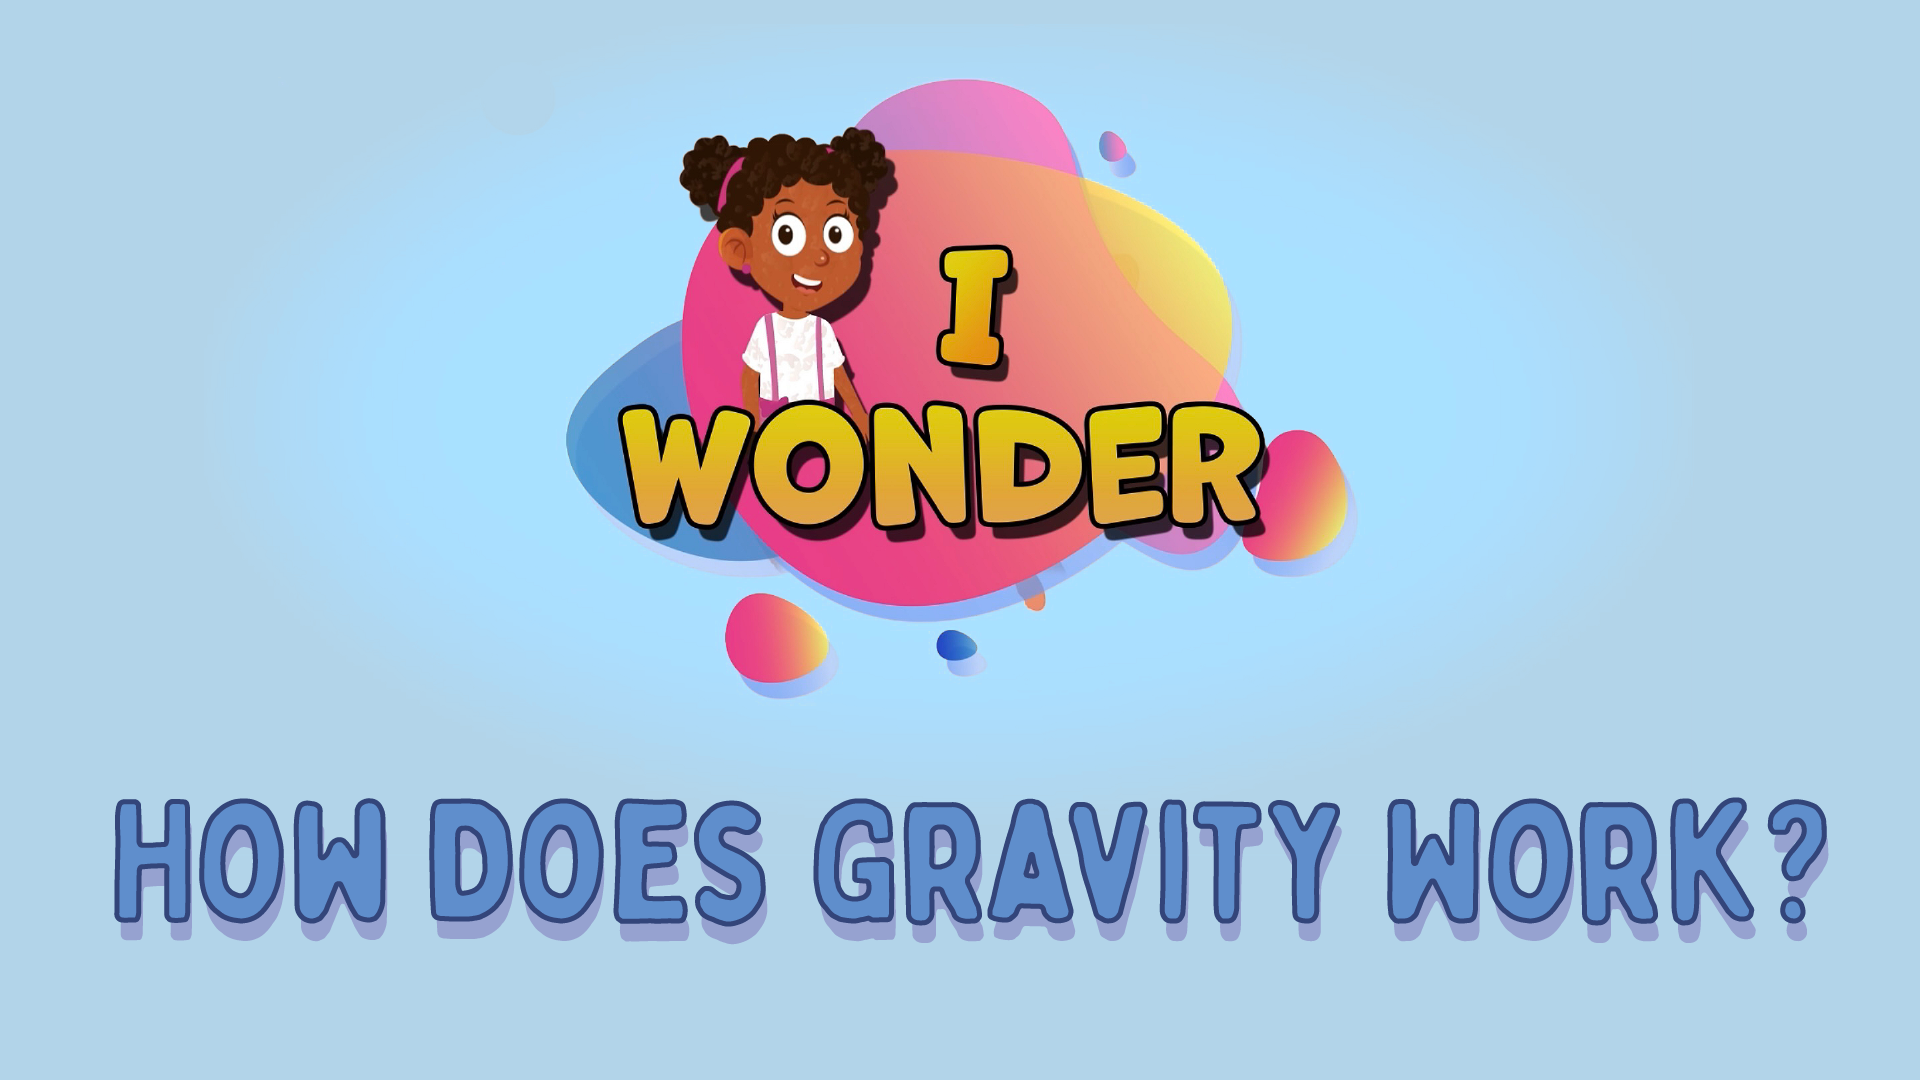 How Does Gravity Work?